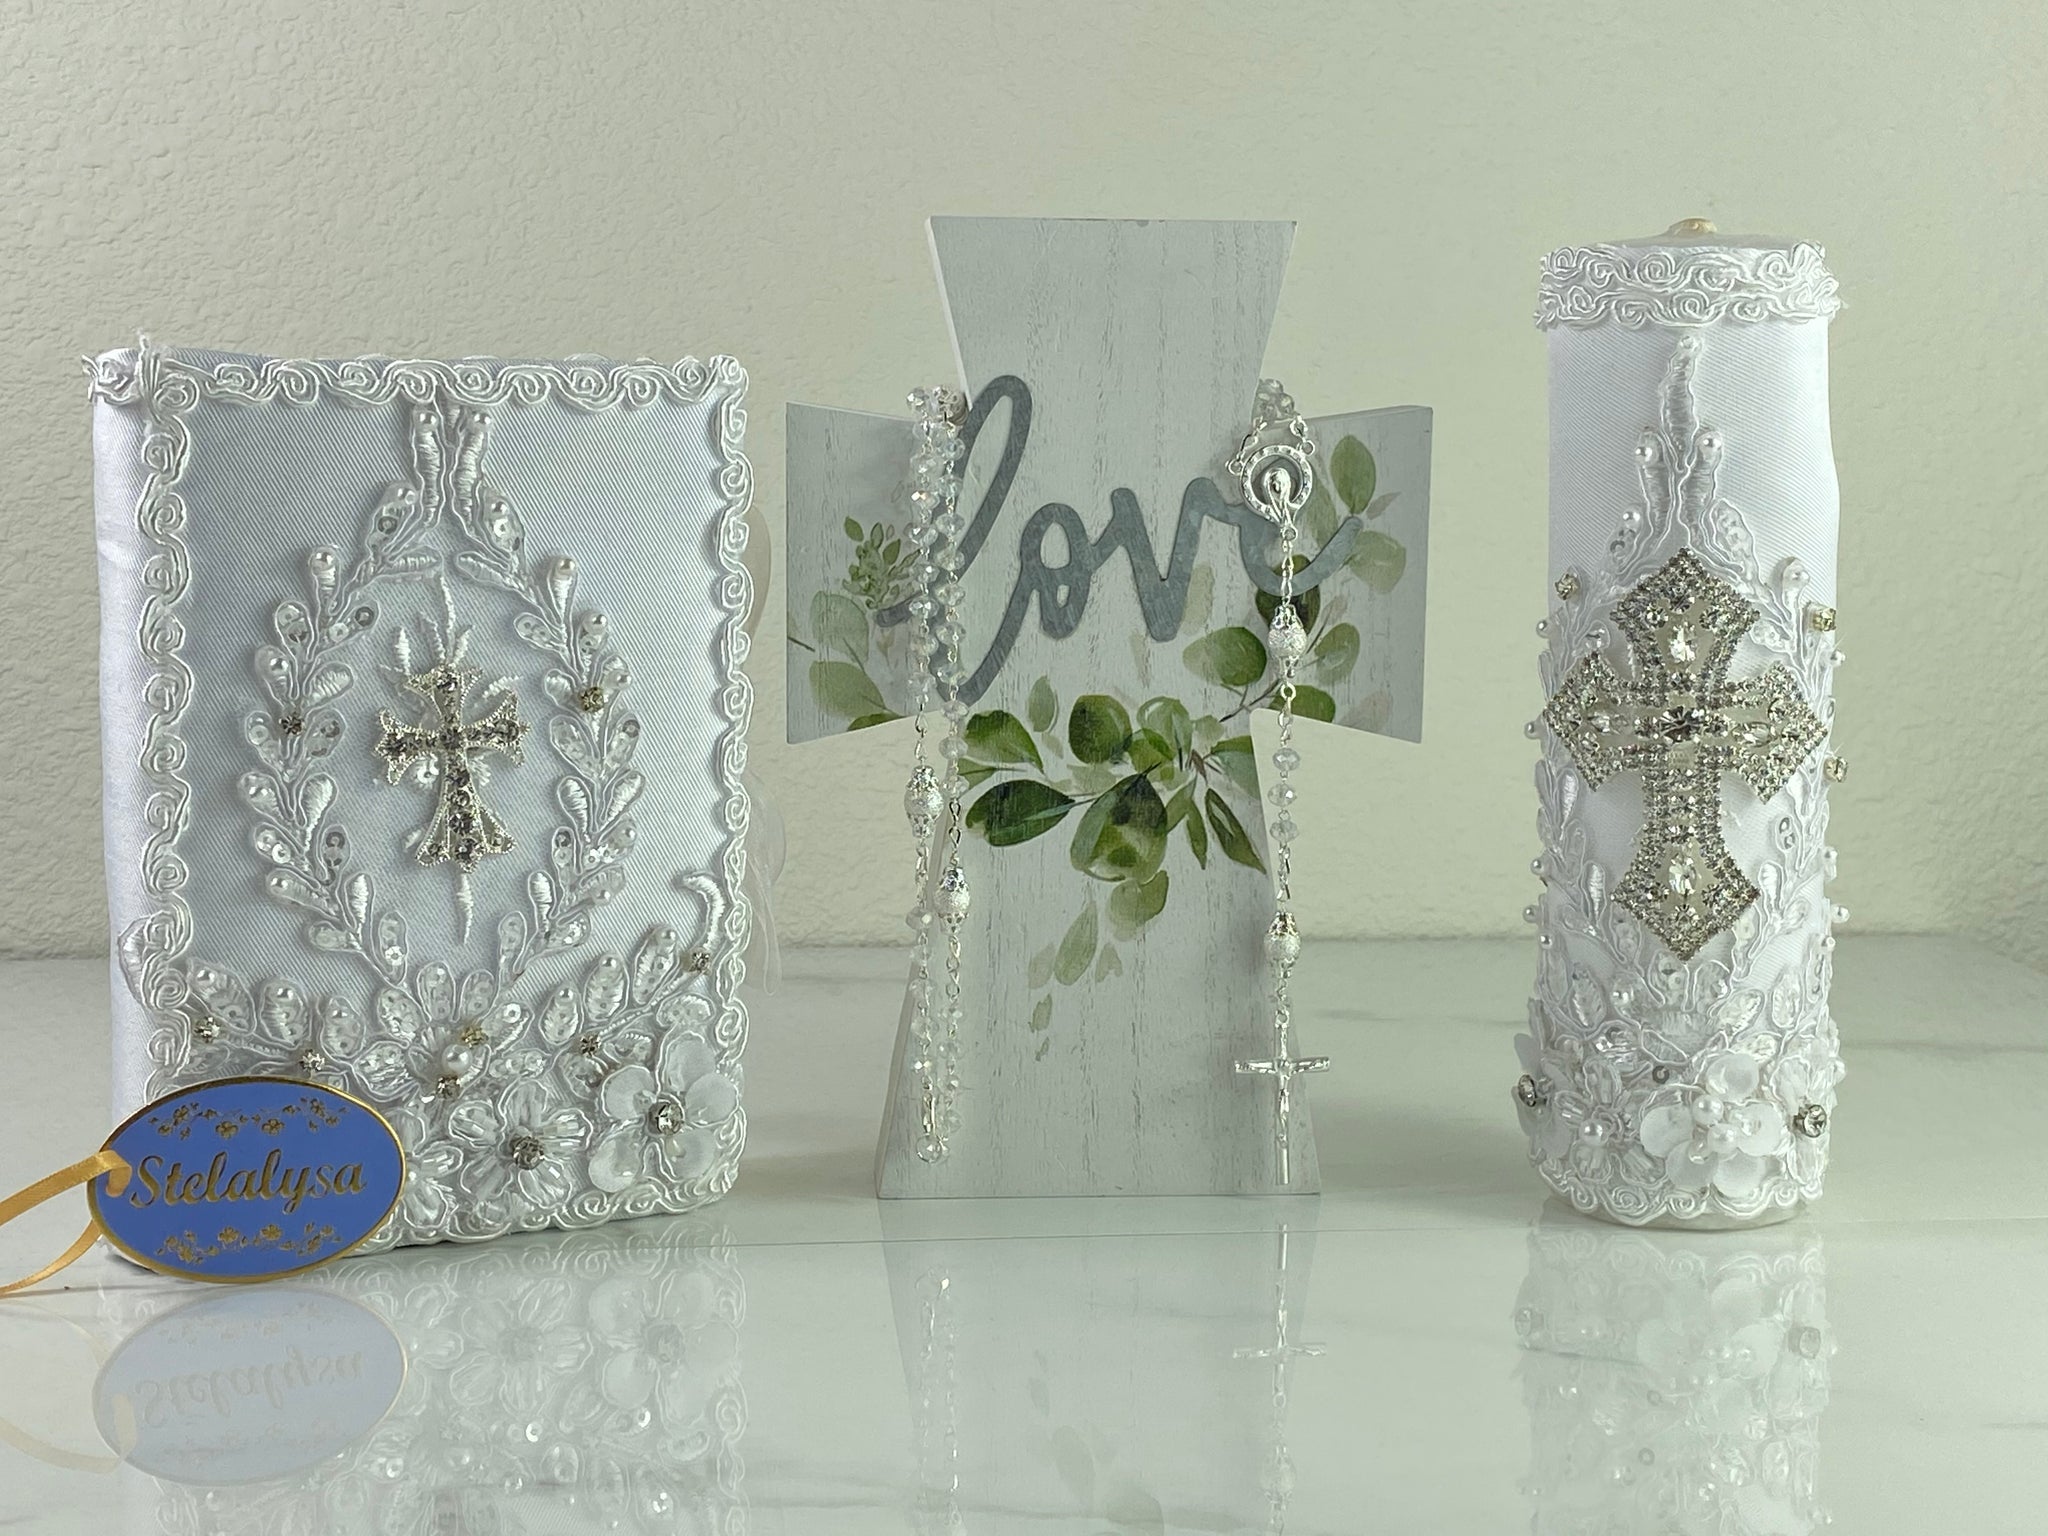 This white Bible Set - candle and bible is handmade and made using satin and lace.  It is elegantly designed with pearls, crystals, flowers in different pastel colors, and beads.  Each piece has a beautiful cross.  An elegant rosary complements this set.  The candle is cylinder in shape.  The rosary is 16.5 in. long and Bible is 6.5 in. by 4.5 in. and the candles approximately the same height.  The Bible includes the Old and New Testament in English. 